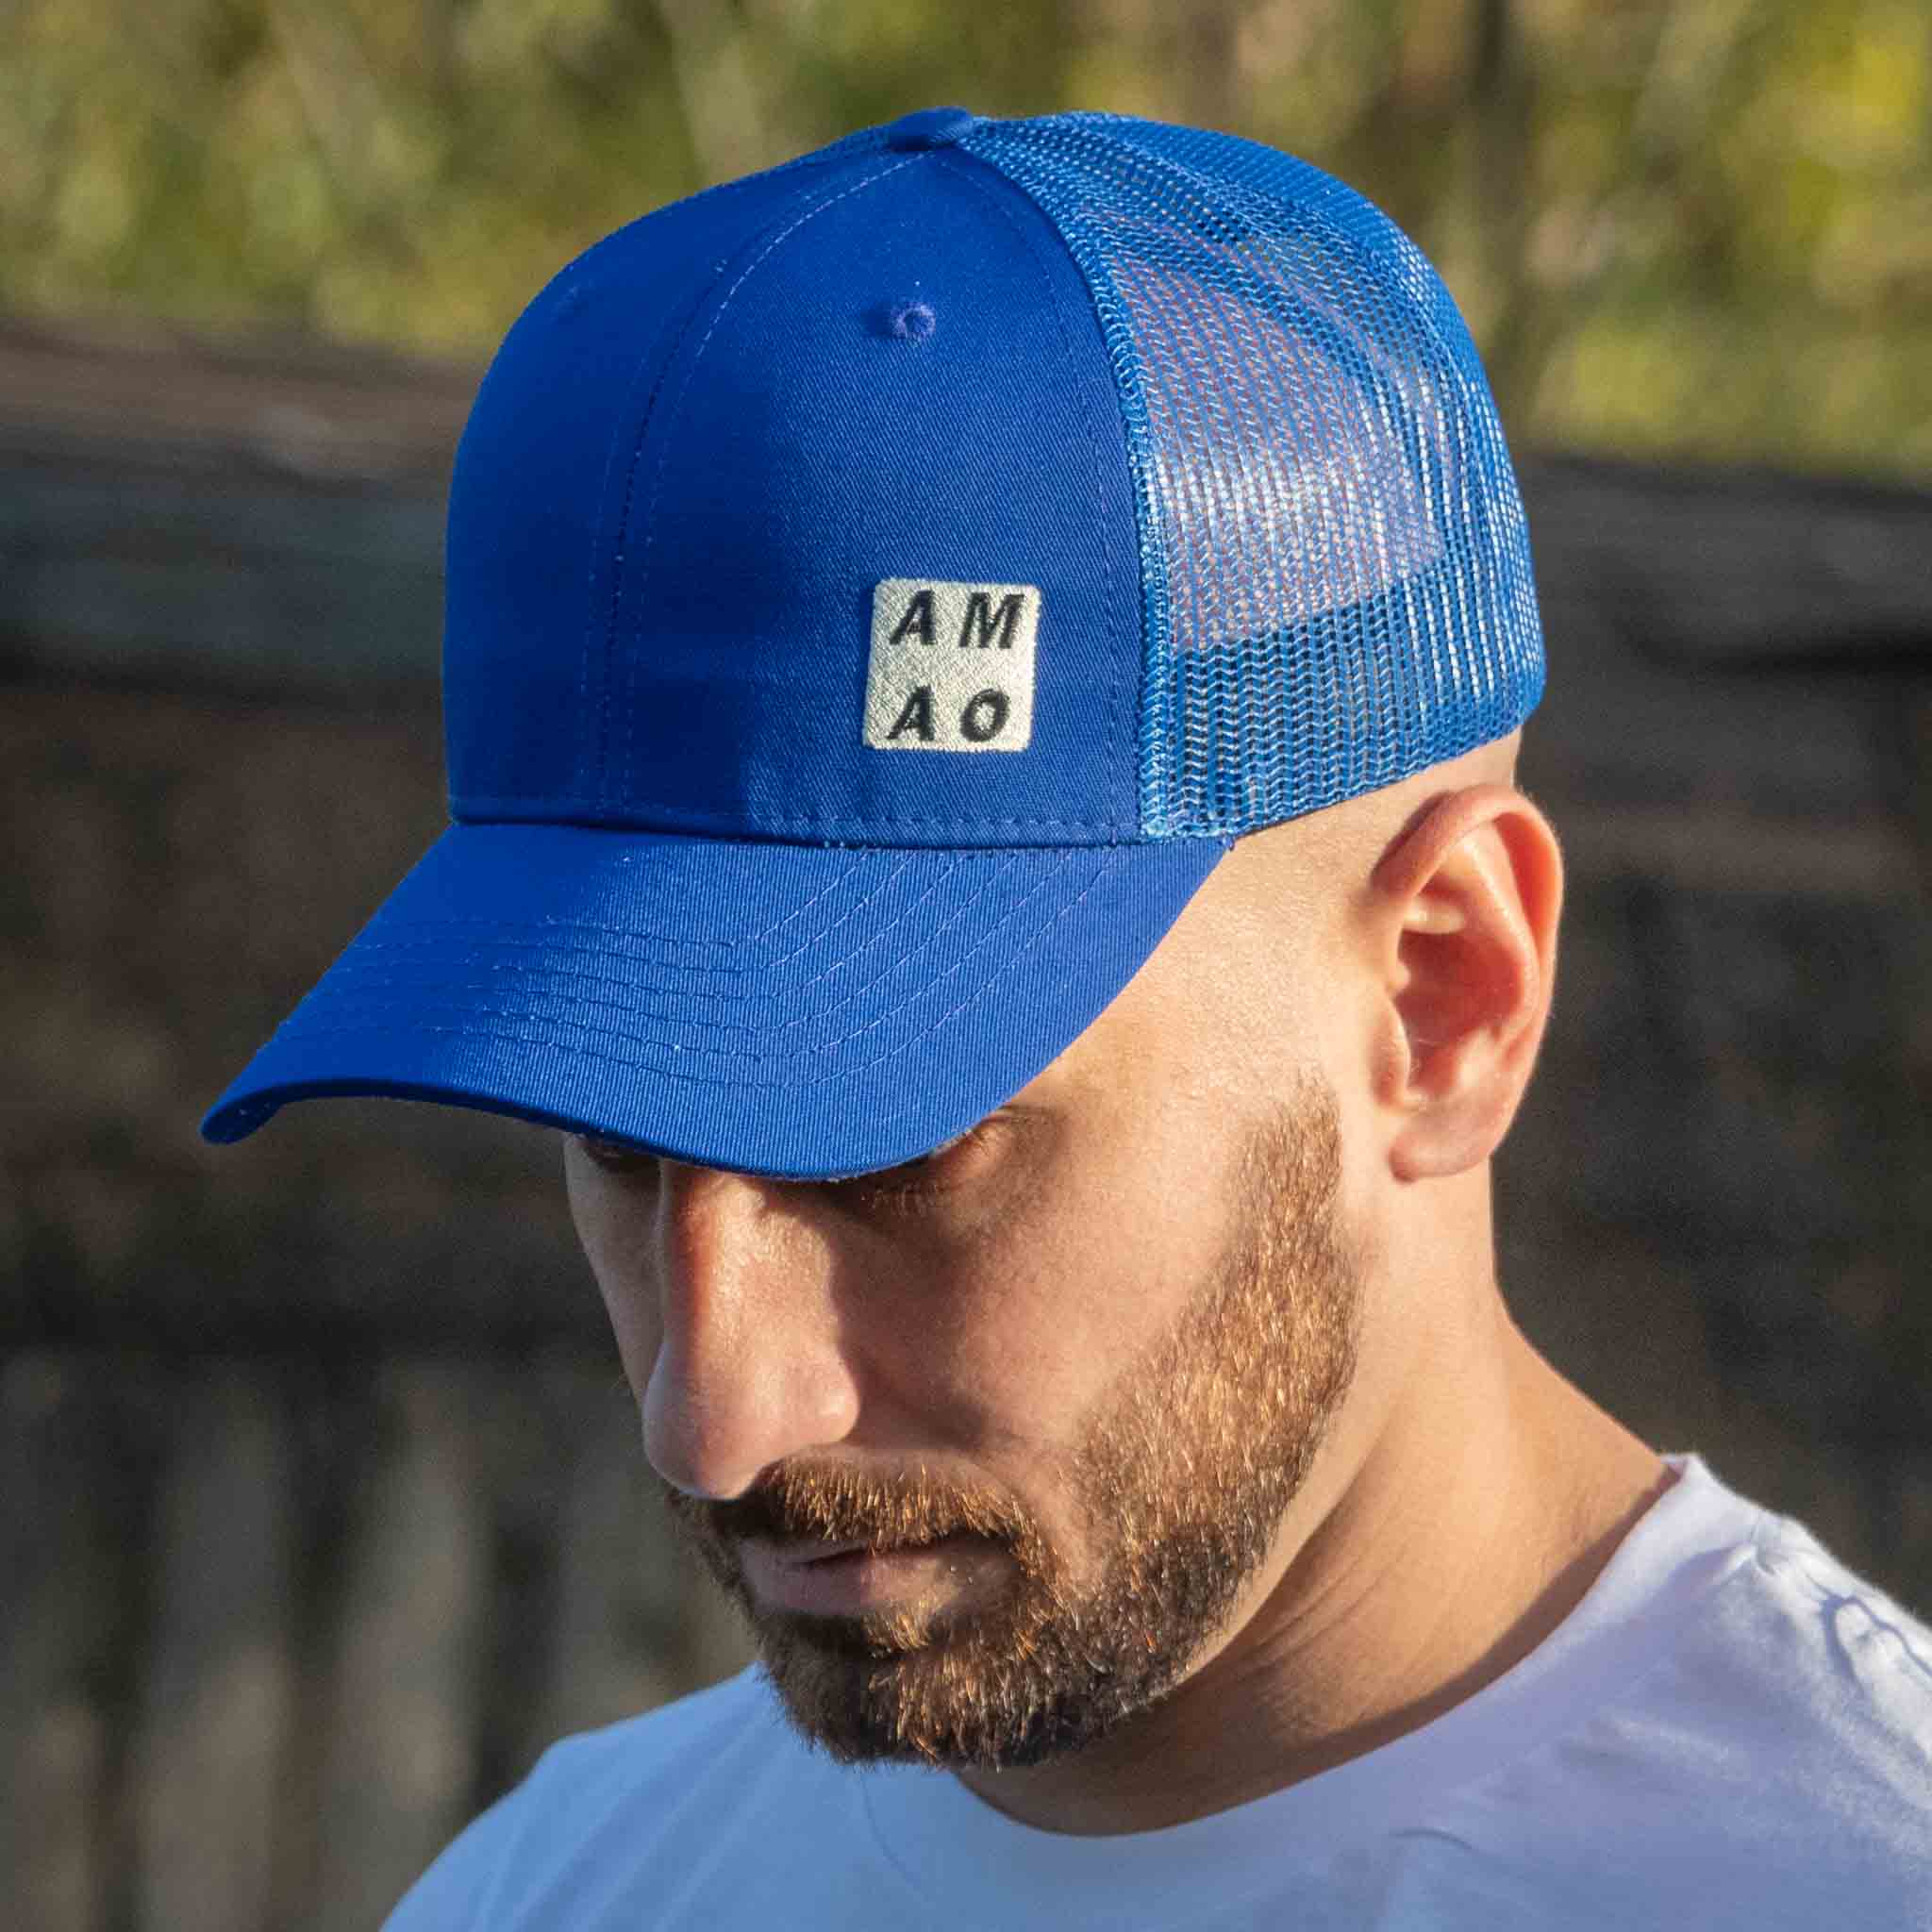 AMAO Trucker Hat - Royal w-Royal Mesh - Compare at $69